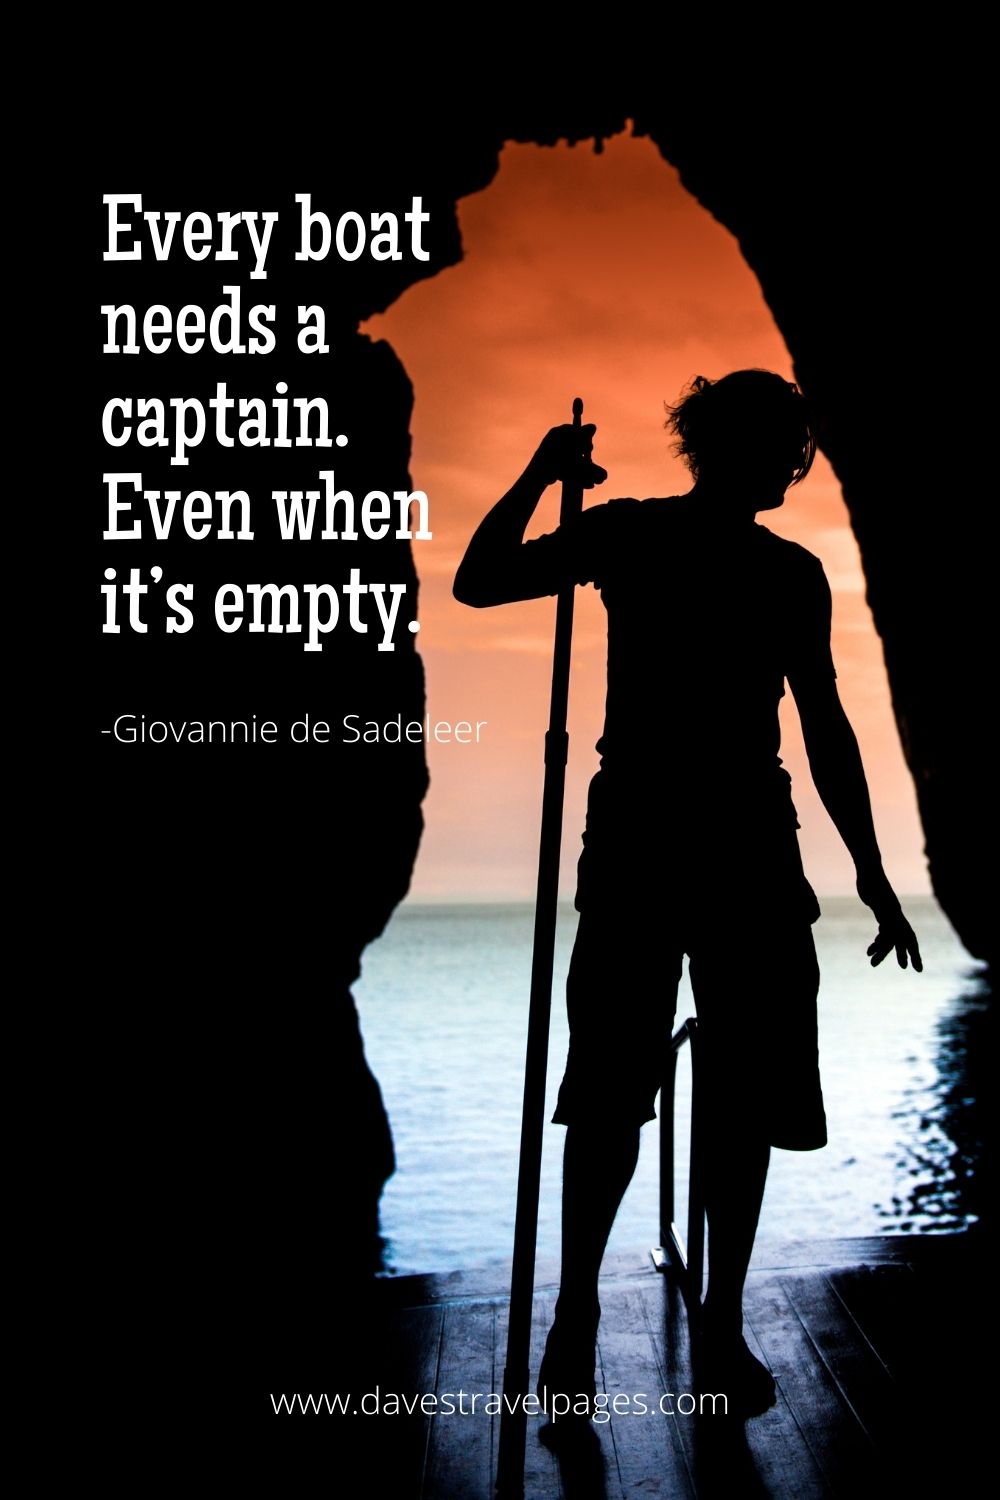 Every boat needs a captain. Even when it’s empty.